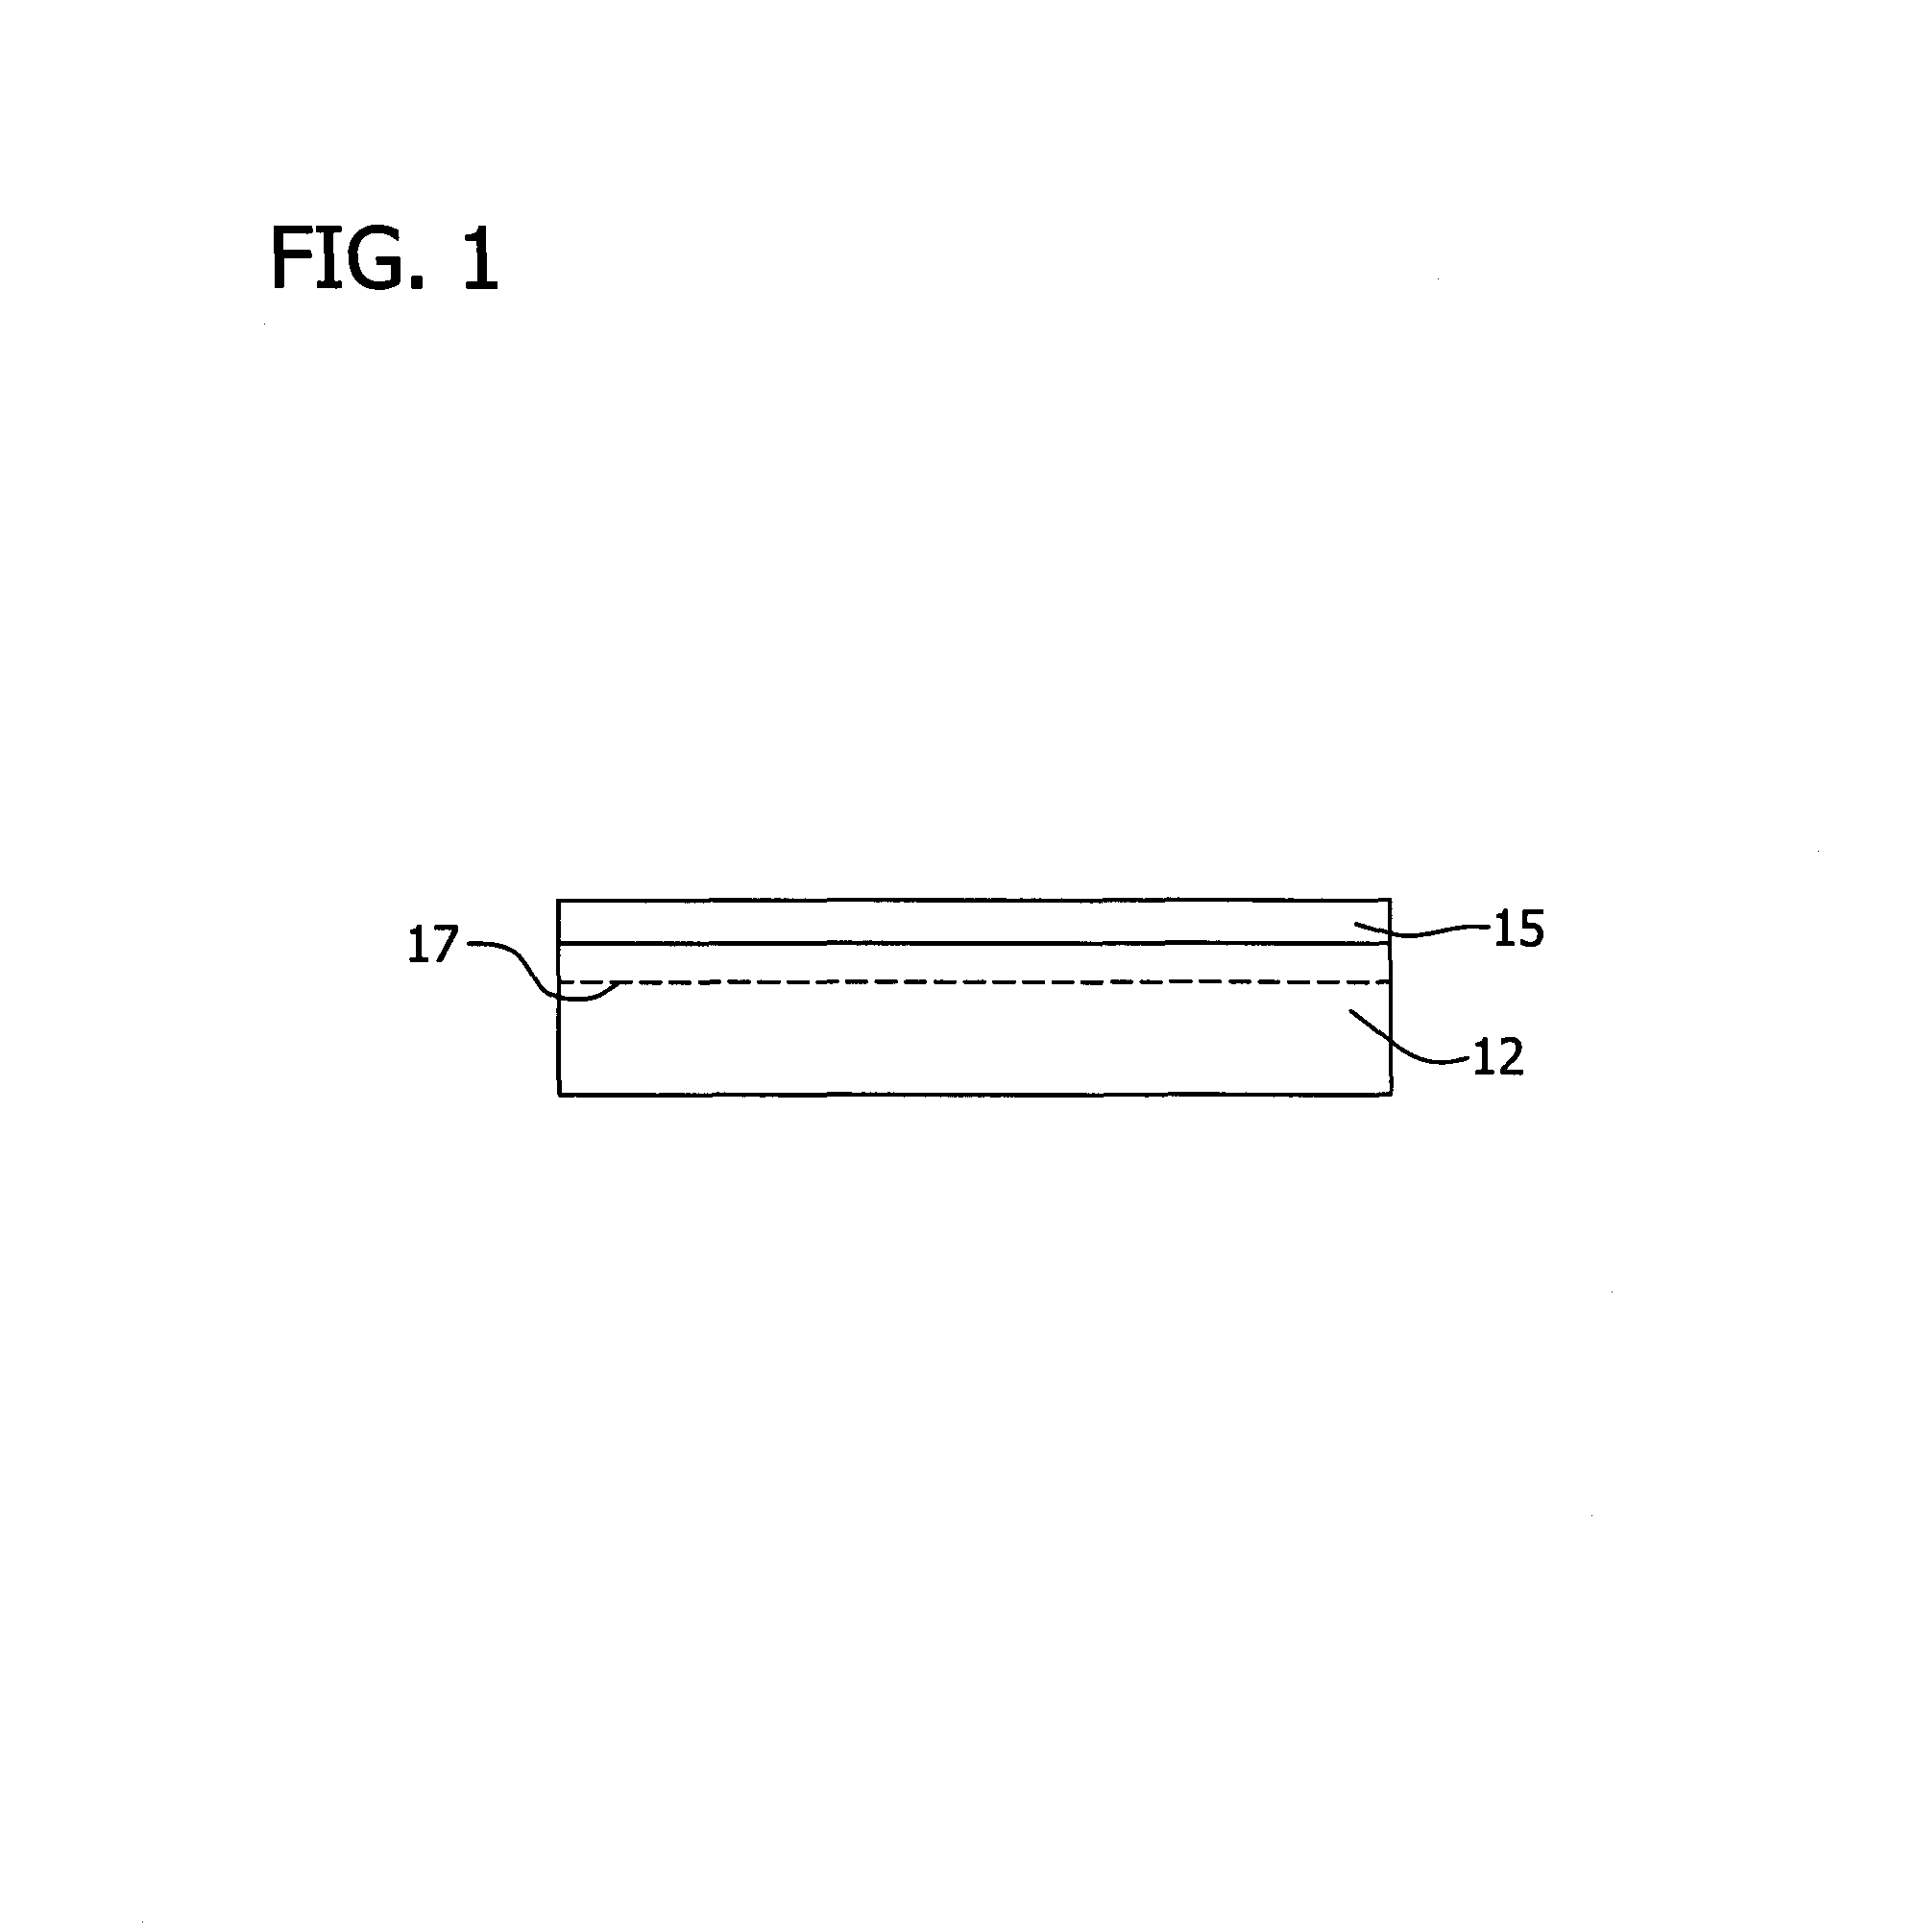 Methods for reducing the width of the unbonded region in SOI structures